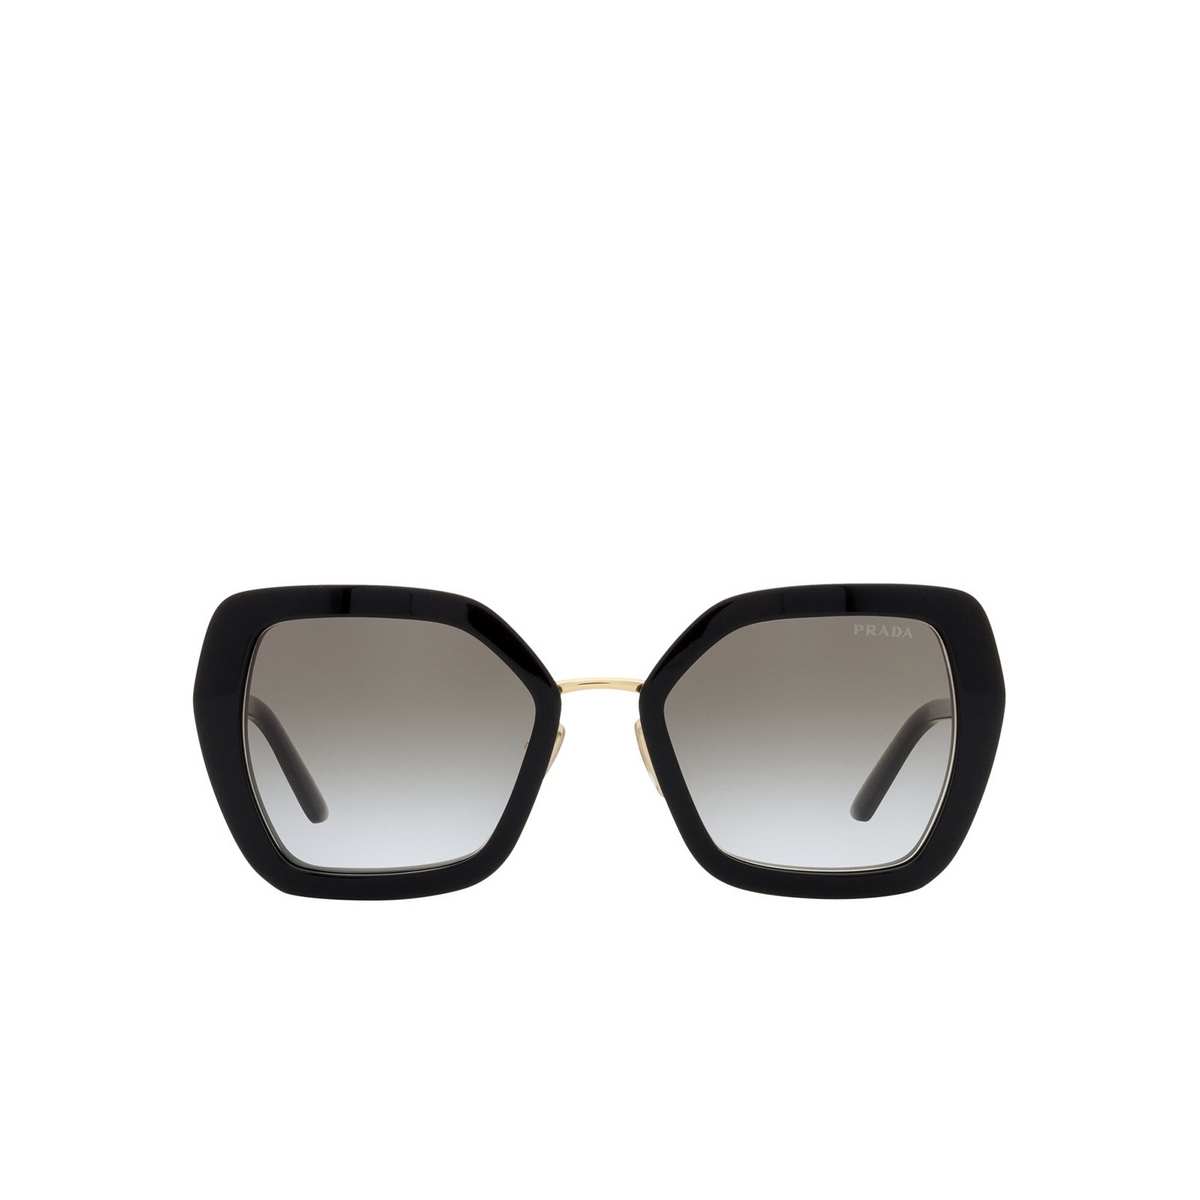 Prada® Butterfly Sunglasses: PR 53YS color Black AAV0A7 - front view.